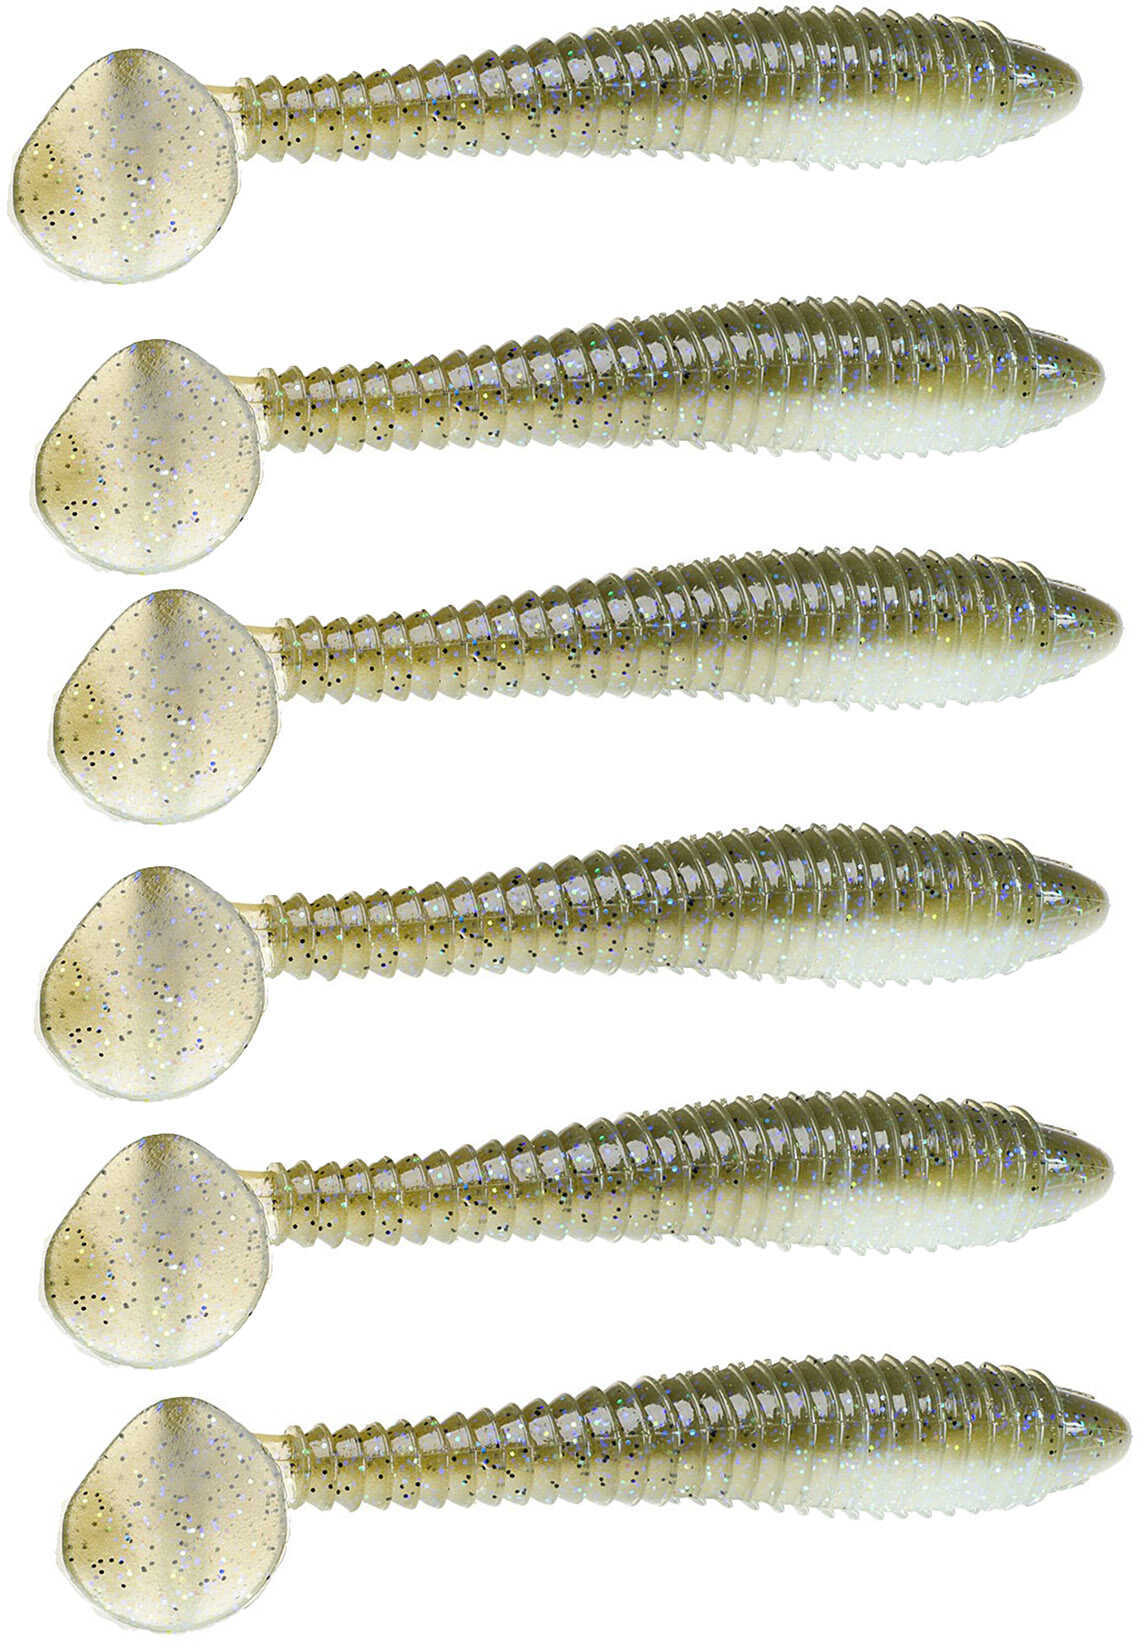 Strike King Rage Tail Swimmer 4In 6Pk Electric Shad Model: RGSW434-265